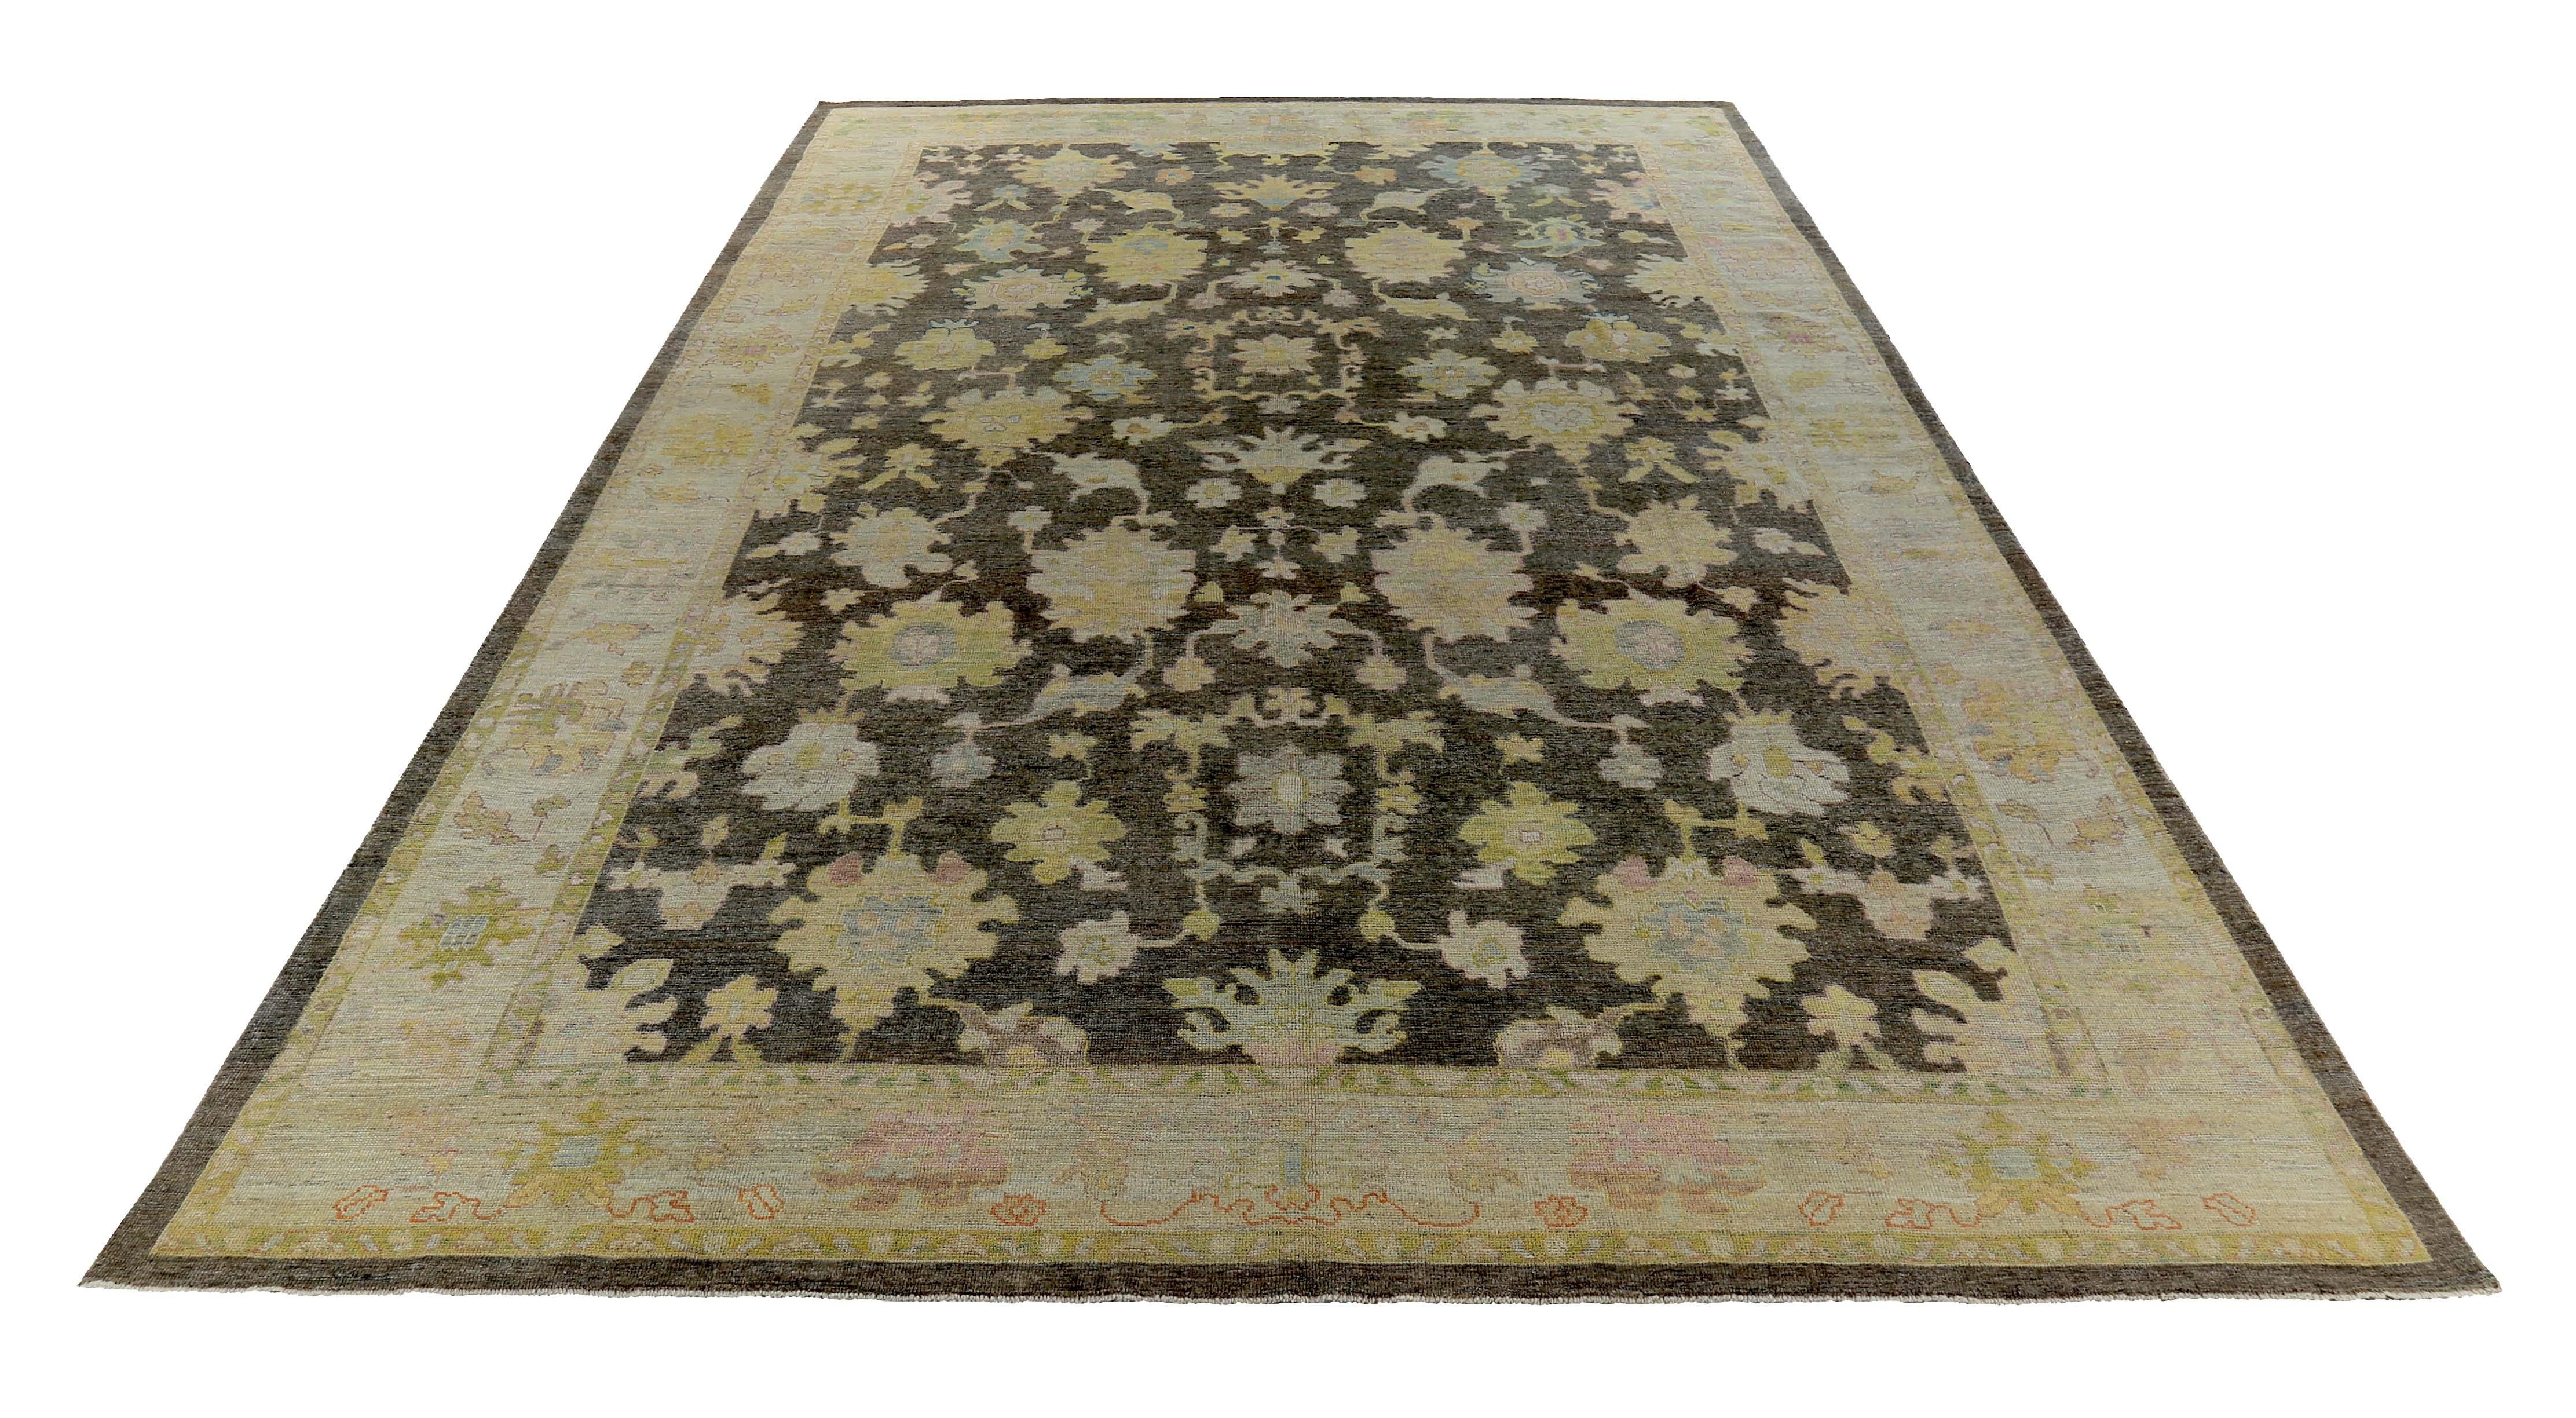 Turkish rug made of handwoven sheep’s wool of the finest quality. It’s colored with organic vegetable dyes that are certified safe for humans and pets alike. It features gold, pink and blue floral details on a lovely ivory and brown field. Flower